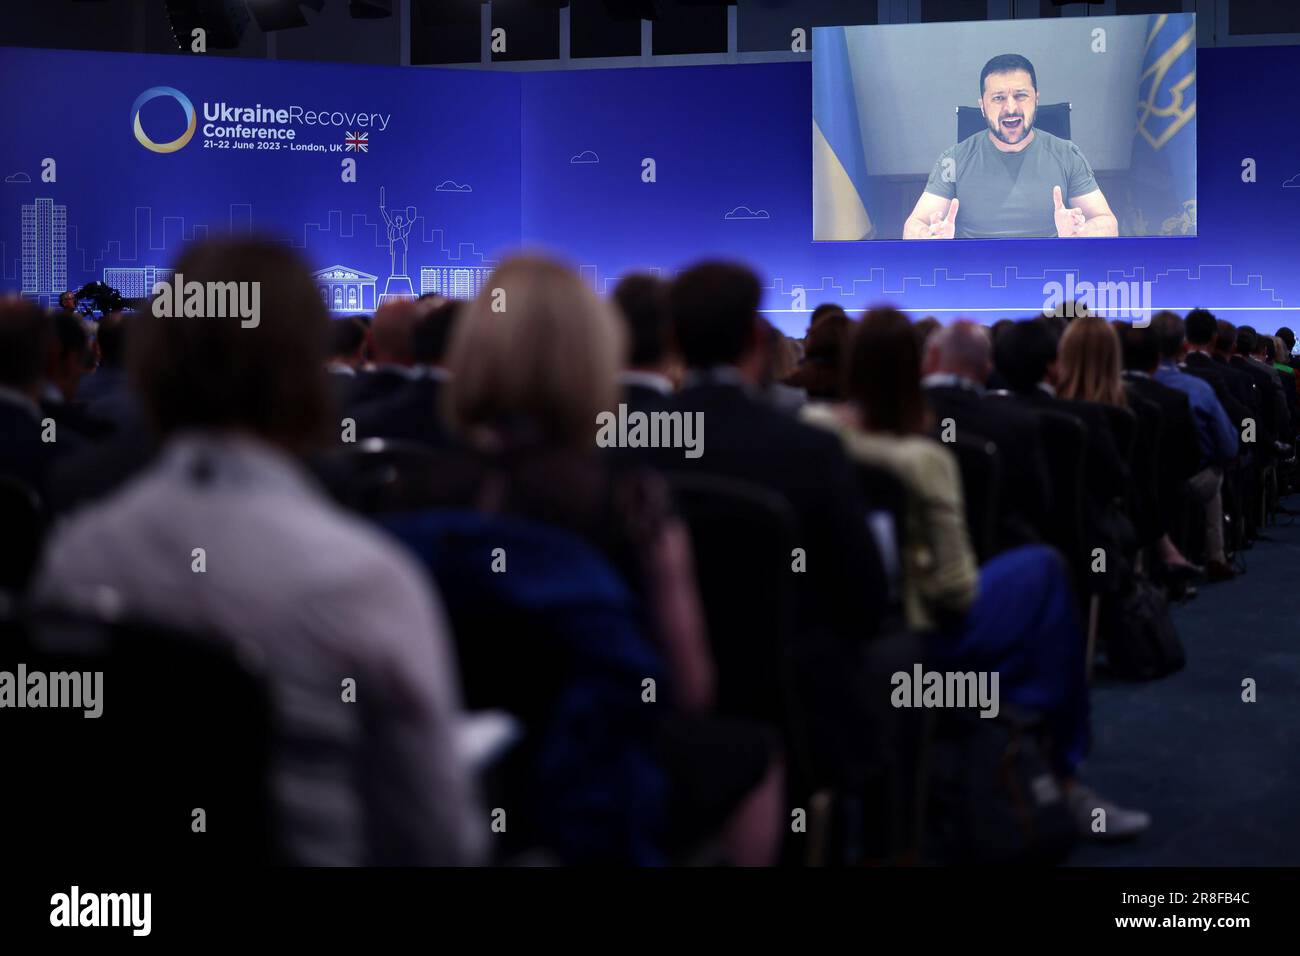 Ukraine's President Volodymyr Zelensky delivers a speech via videolink at the opening session on the first day of the Ukraine Recovery Conference, held at the InterContinental London - O2, in east London. Picture date: Wednesday June 21, 2023. Stock Photo